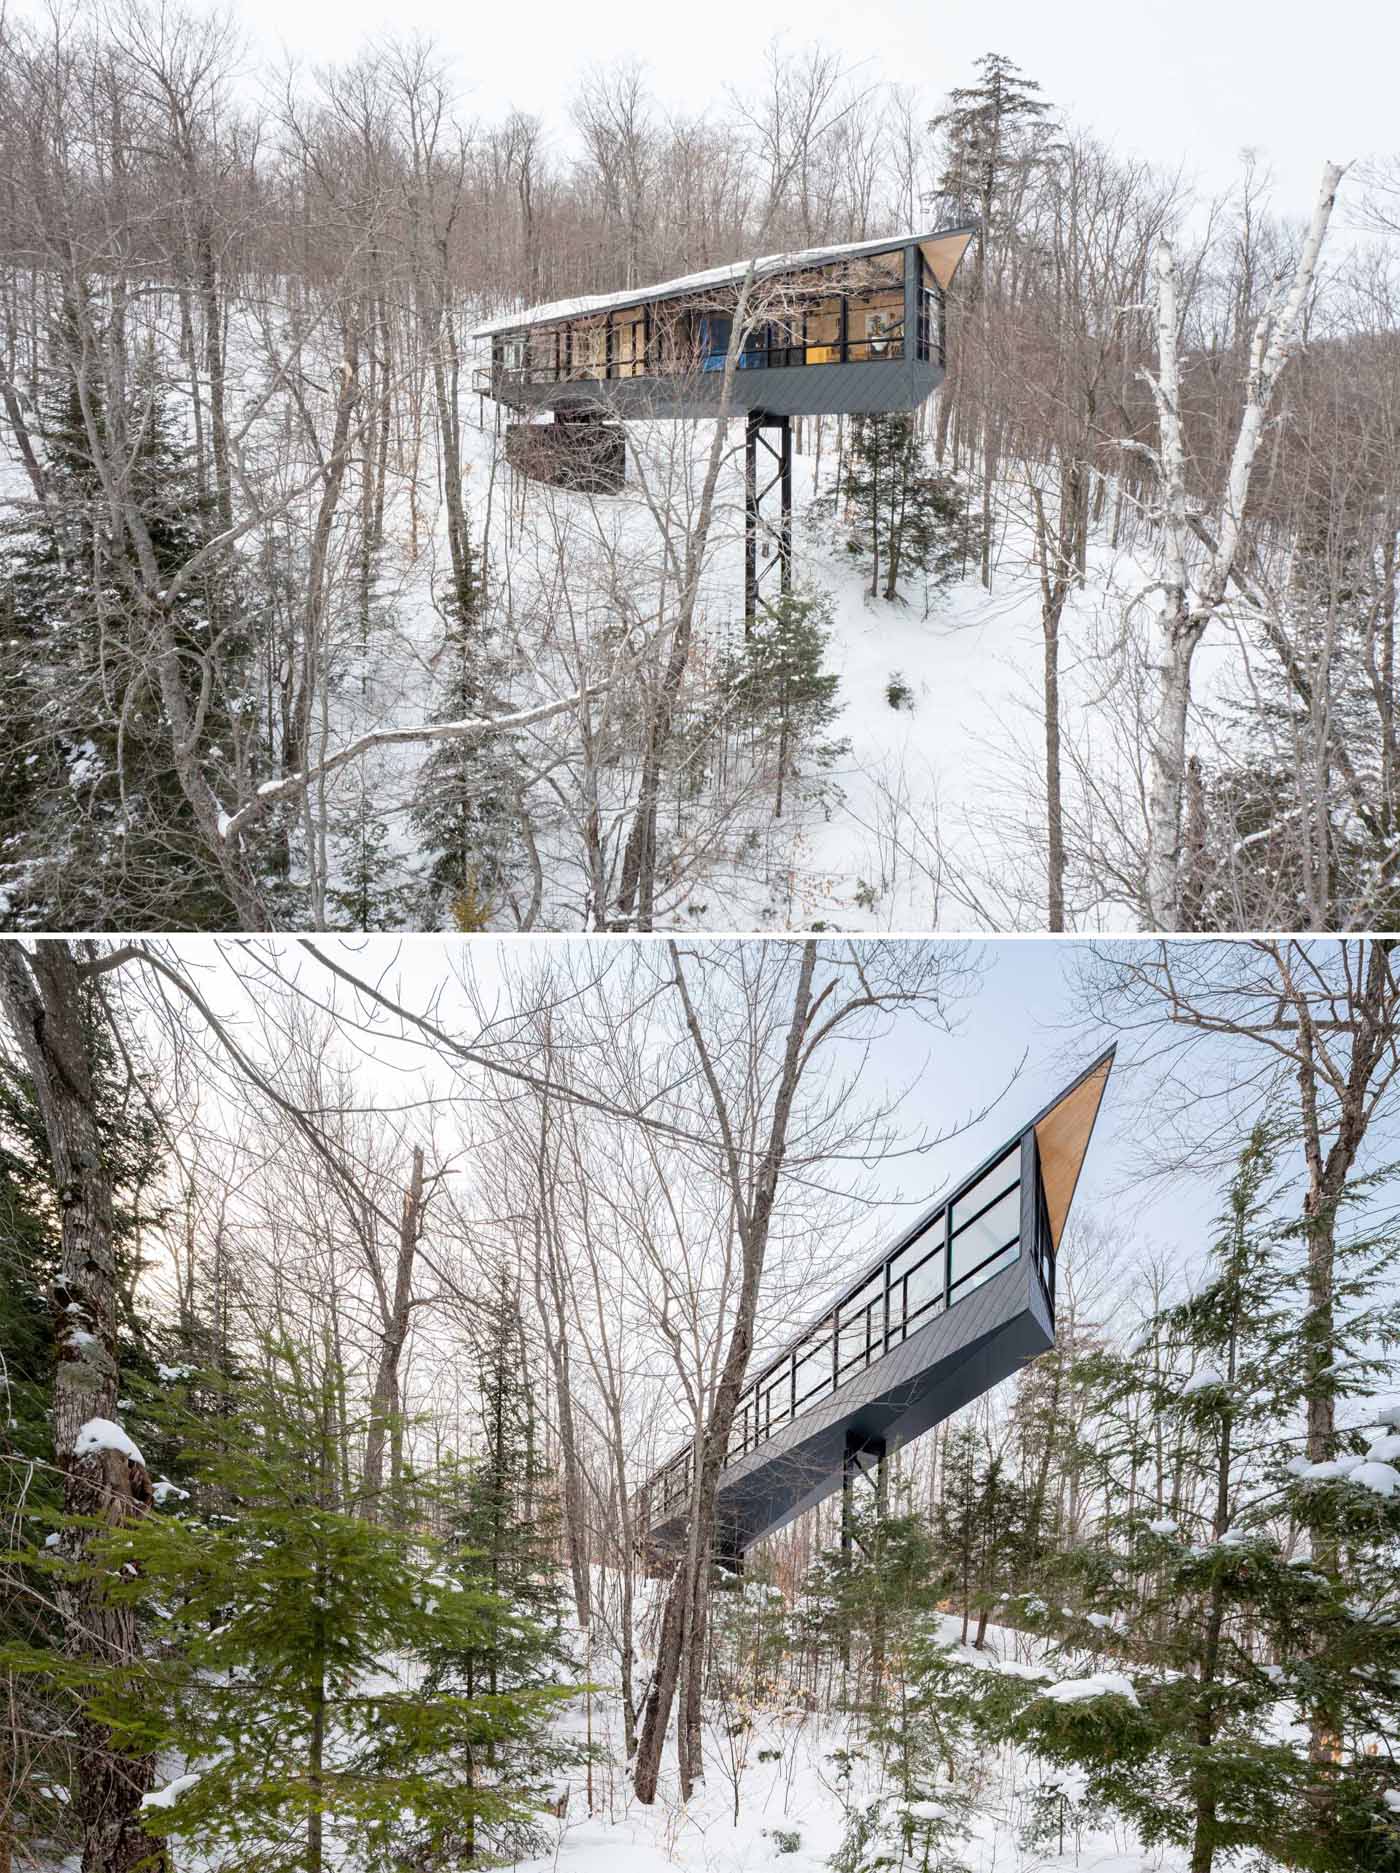 A modern cabin elevated in the forest.